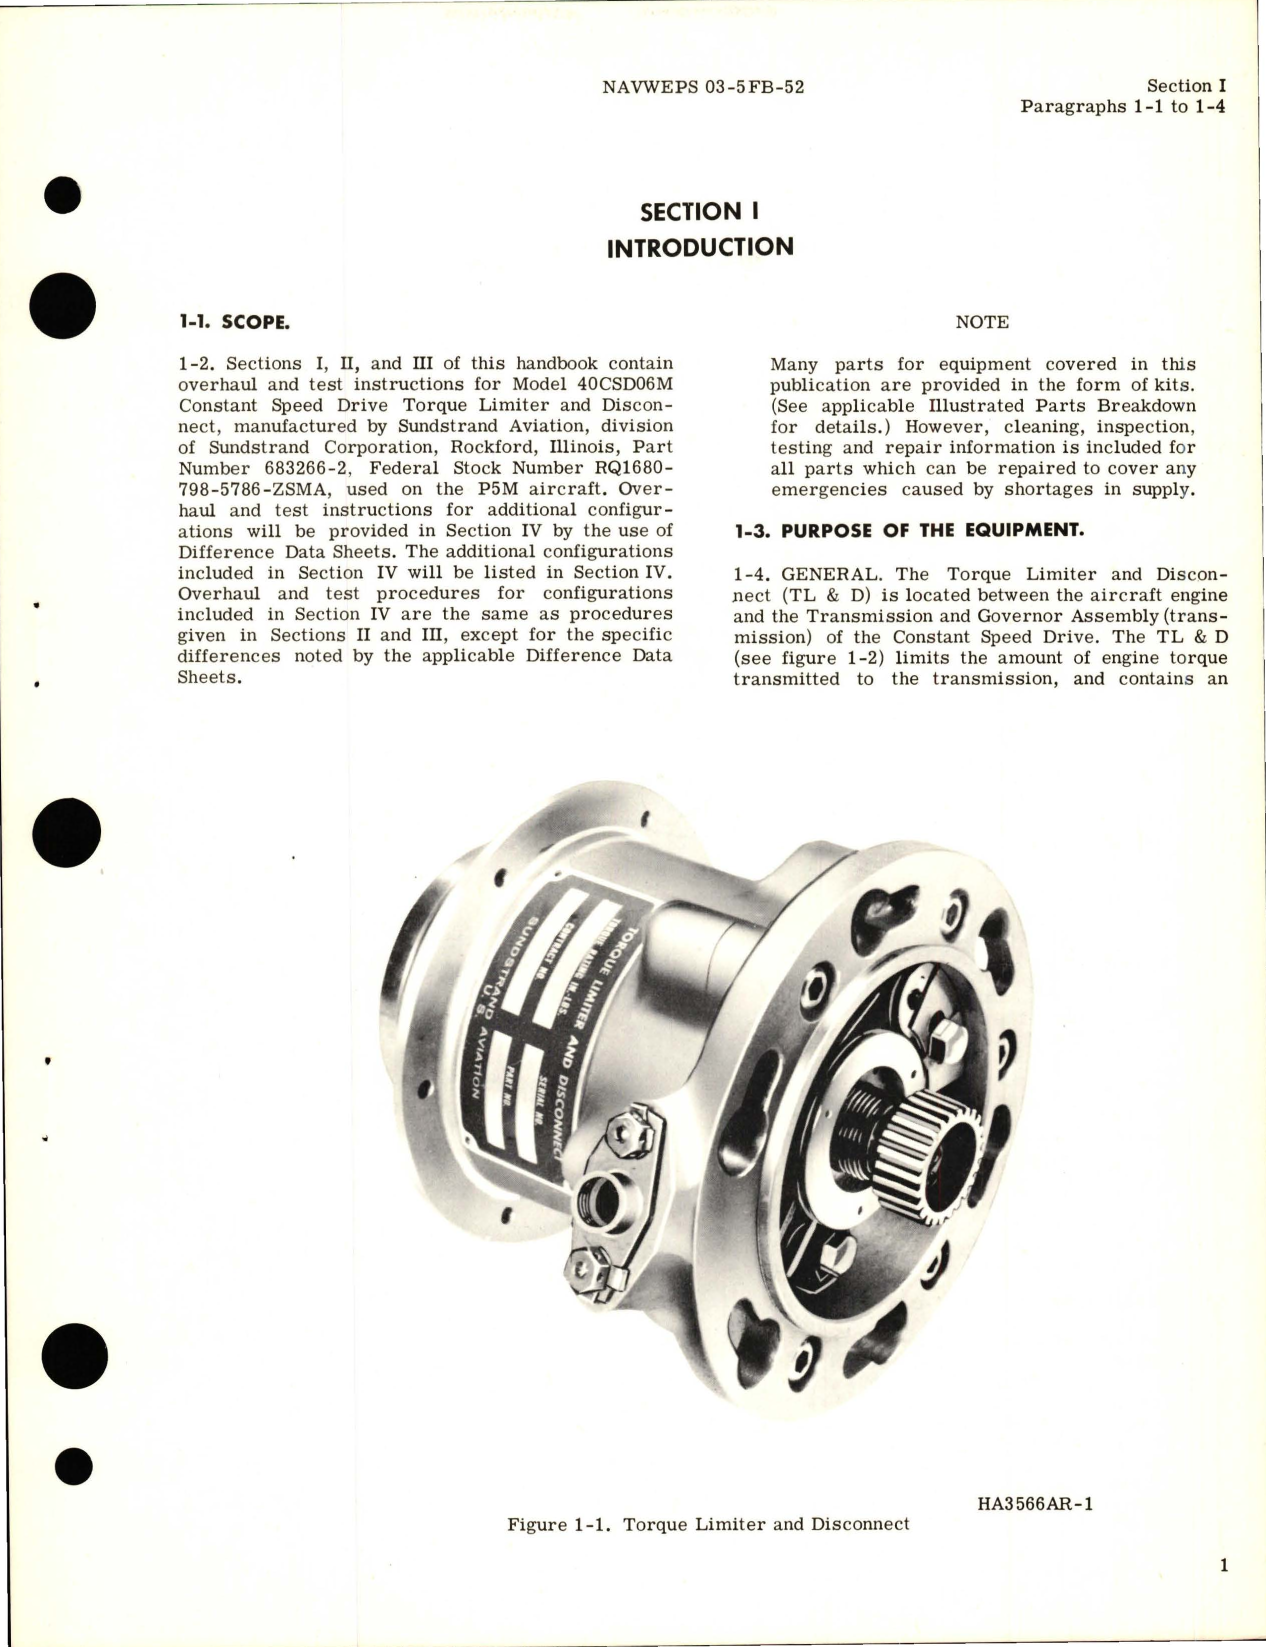 Sample page 5 from AirCorps Library document: Overhaul Instructions for Torque Limiter & Disconnect - Part 683266-2